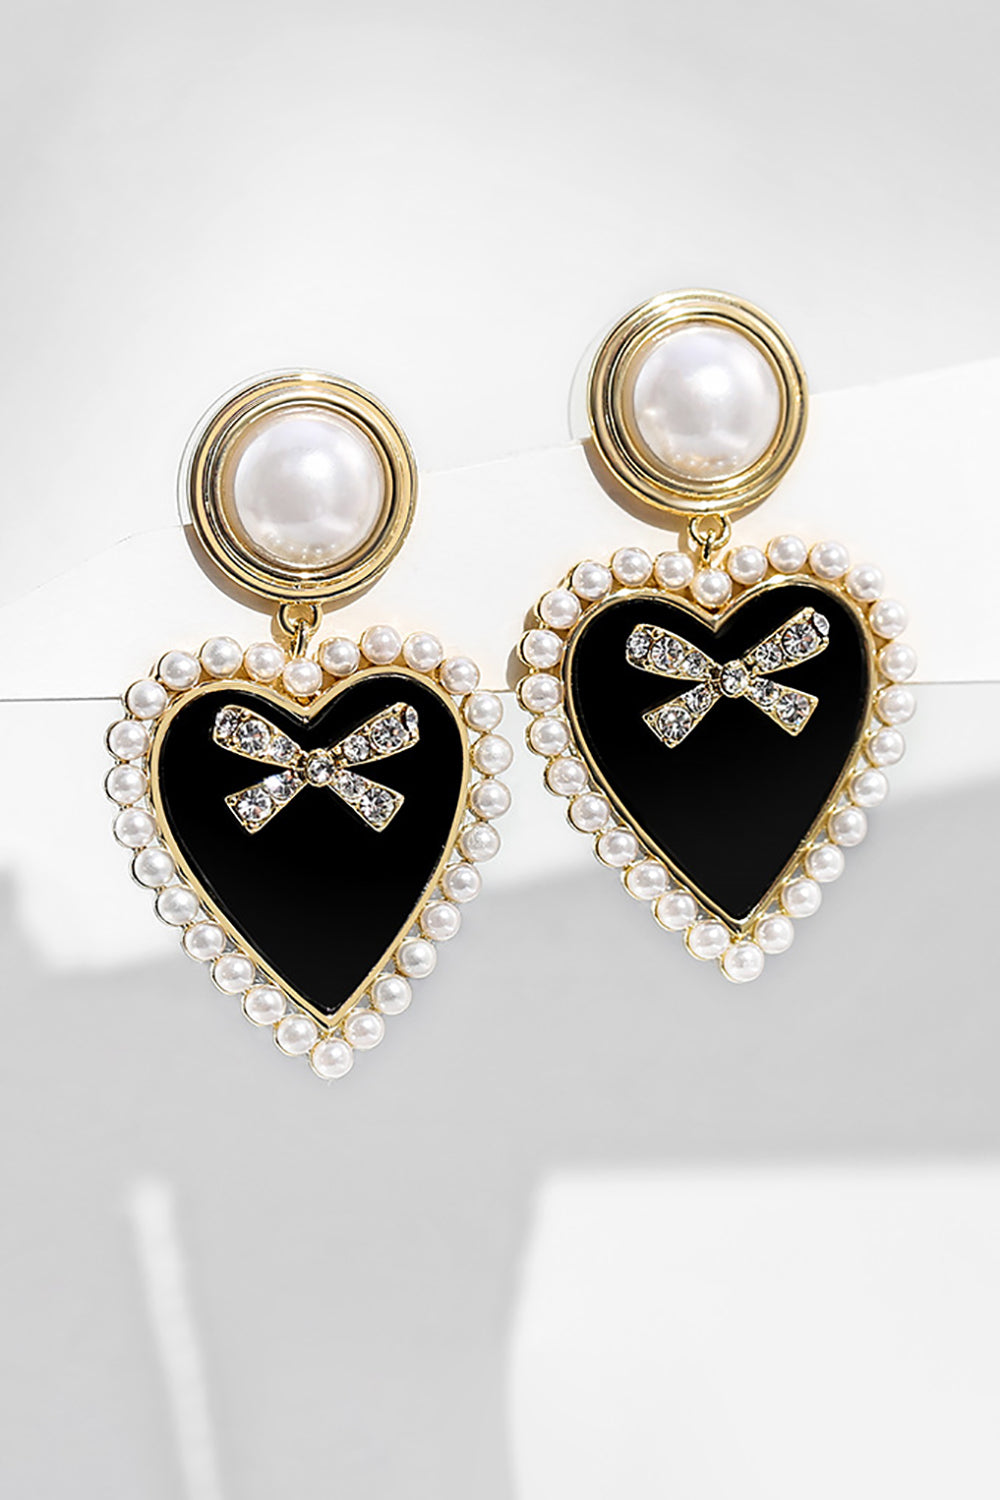 Buy Bindhani Women's Antique Black Golden Earrings With White Stone